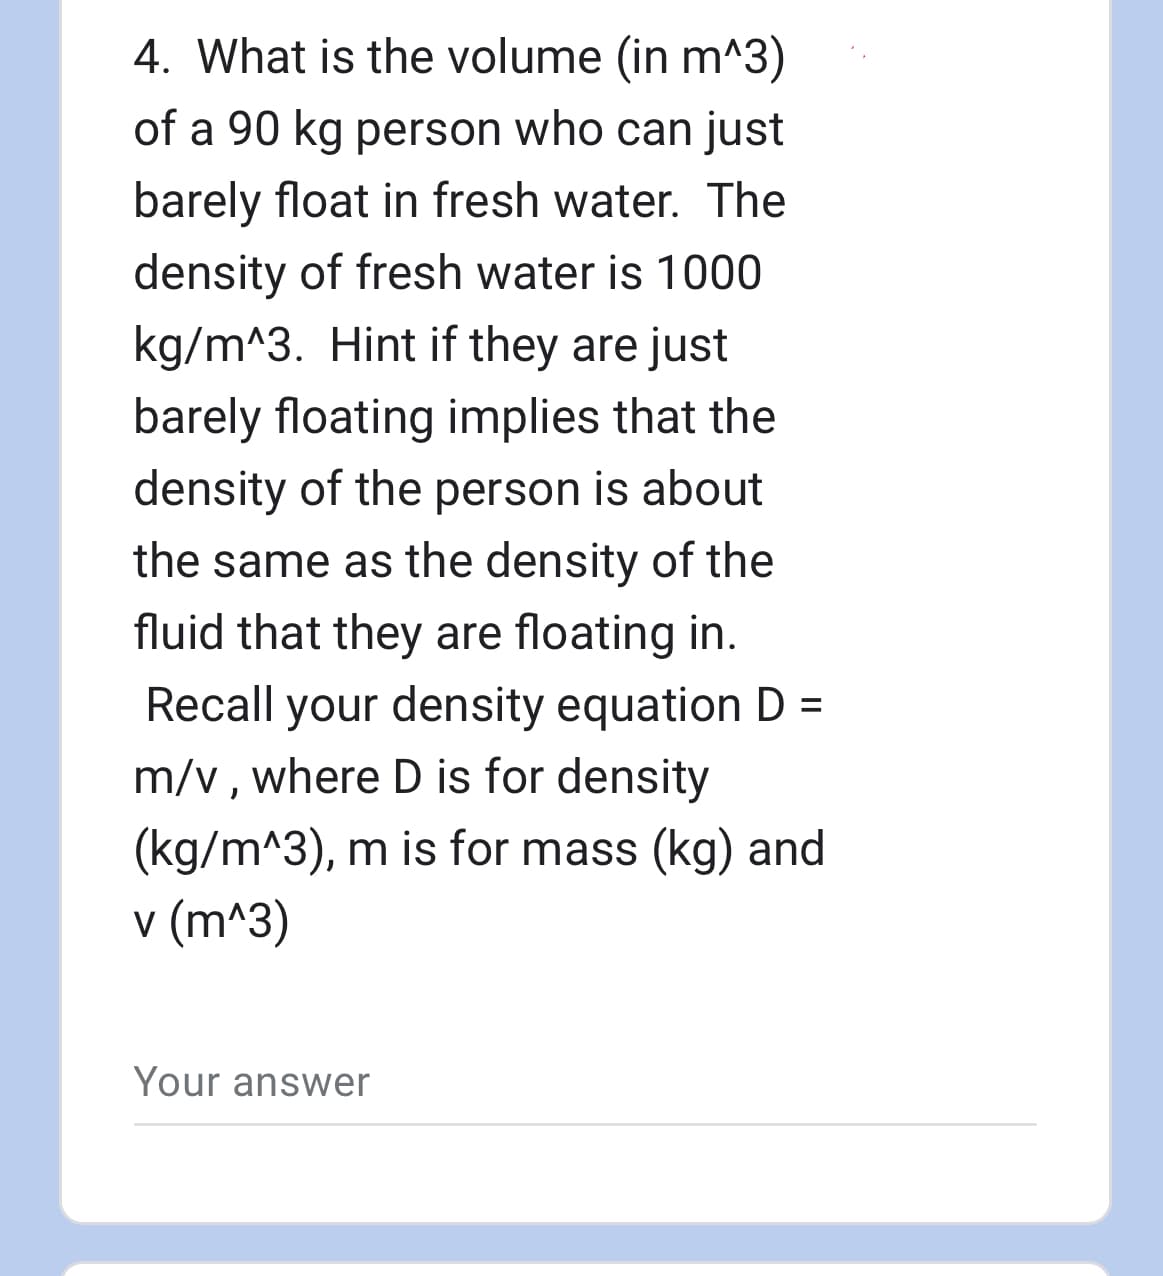 4. What is the volume (in m^3)
of a 90 kg person who can just
barely float in fresh water. The
density of fresh water is 1000
kg/m^3. Hint if they are just
barely floating implies that the
density of the person is about
the same as the density of the
fluid that they are floating in.
Recall your density equation D =
m/v, where D is for density
(kg/m^3), m is for mass (kg) and
v (m^3)
Your answer